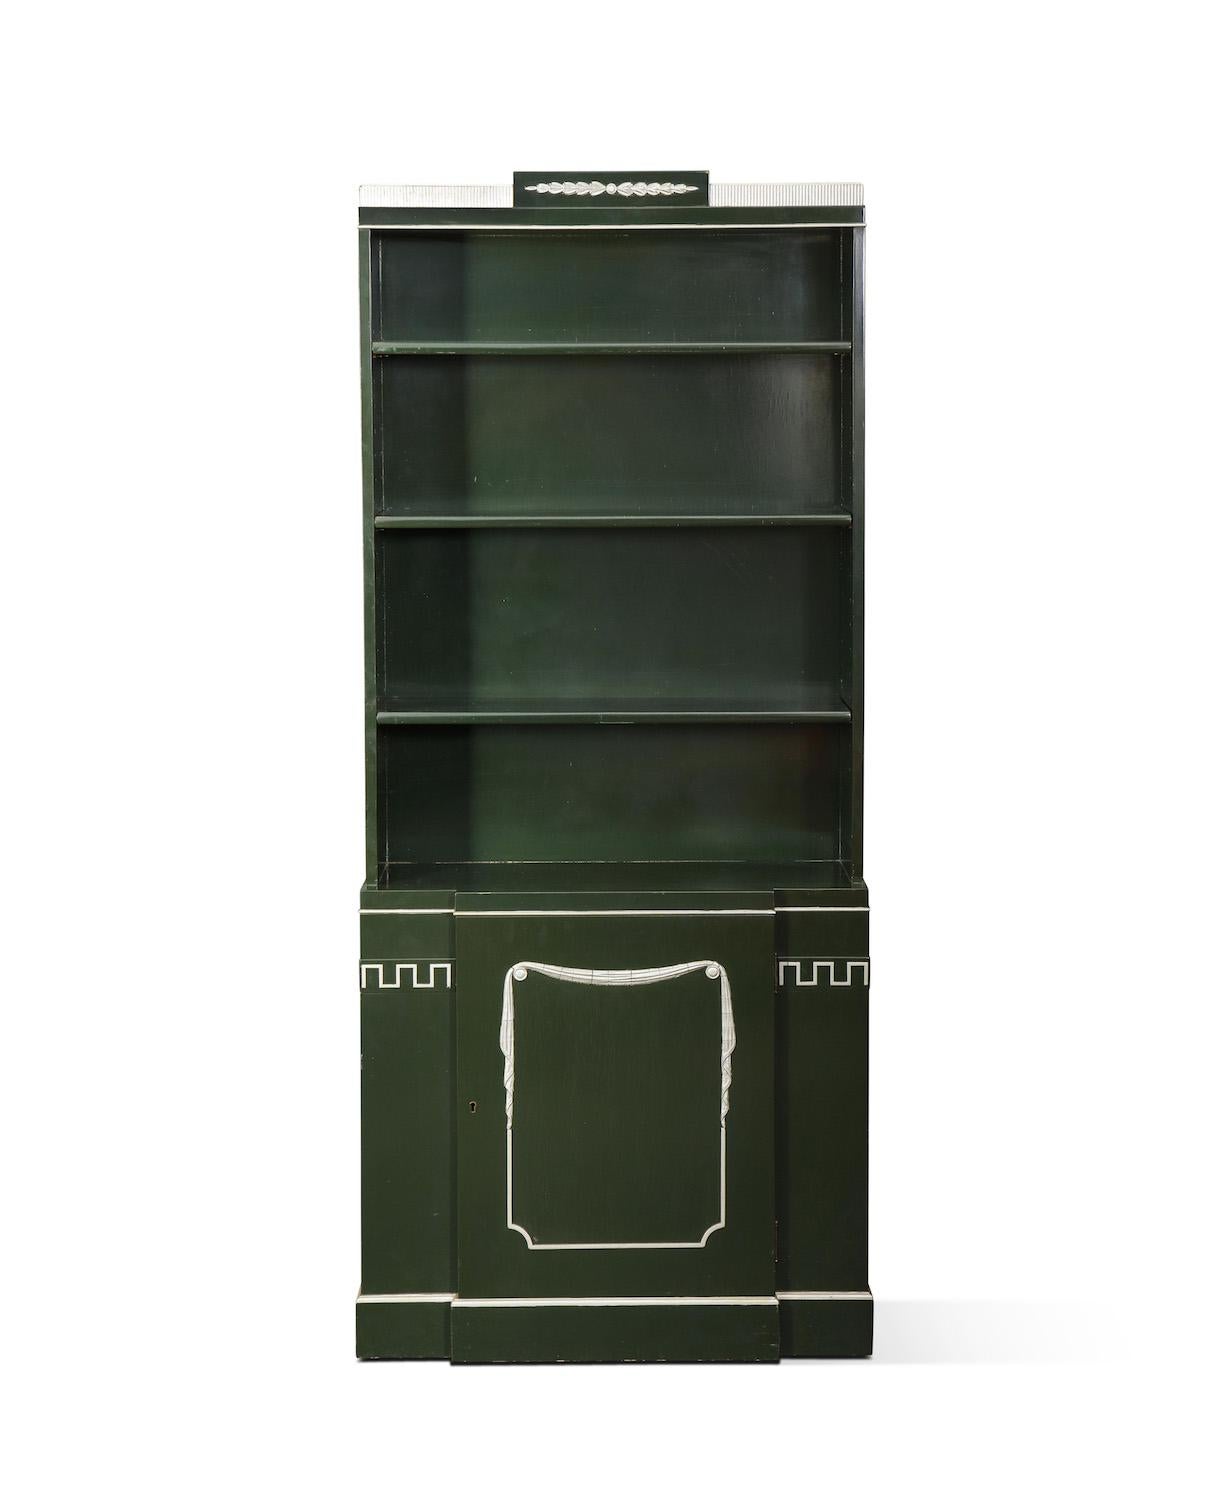 Pair of Grosfeld House bookcases in Forrest green lacquer with silver detailing. Interior shelving at bottom section.